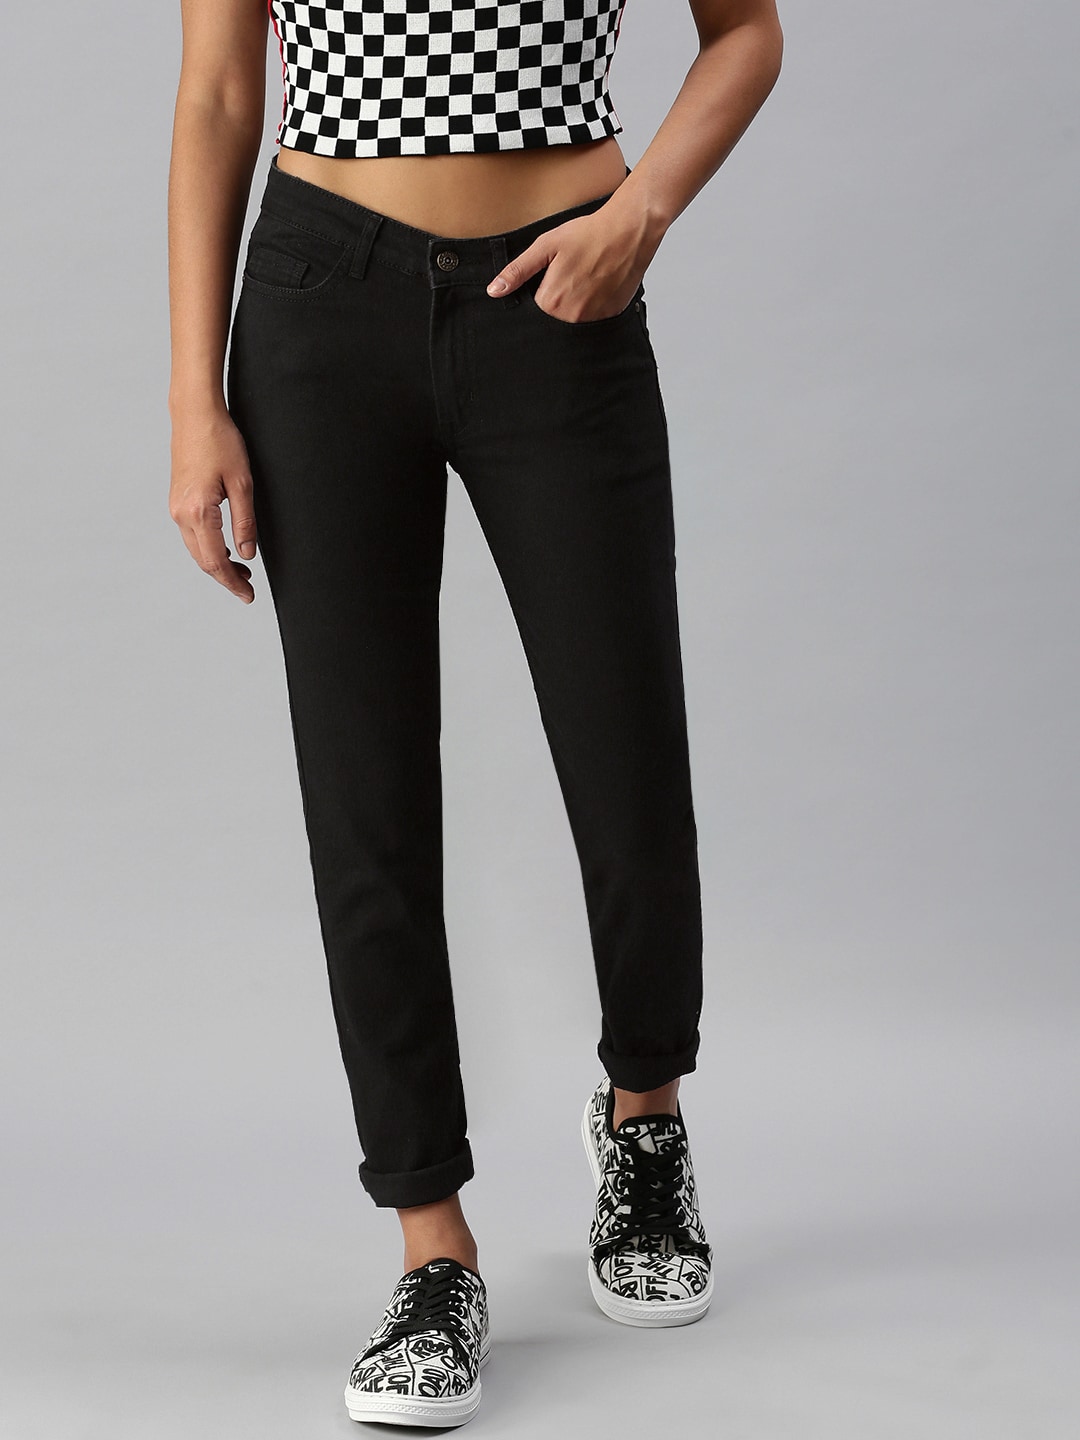 abof Women Black Slim Fit Stretchable Jeans Price in India